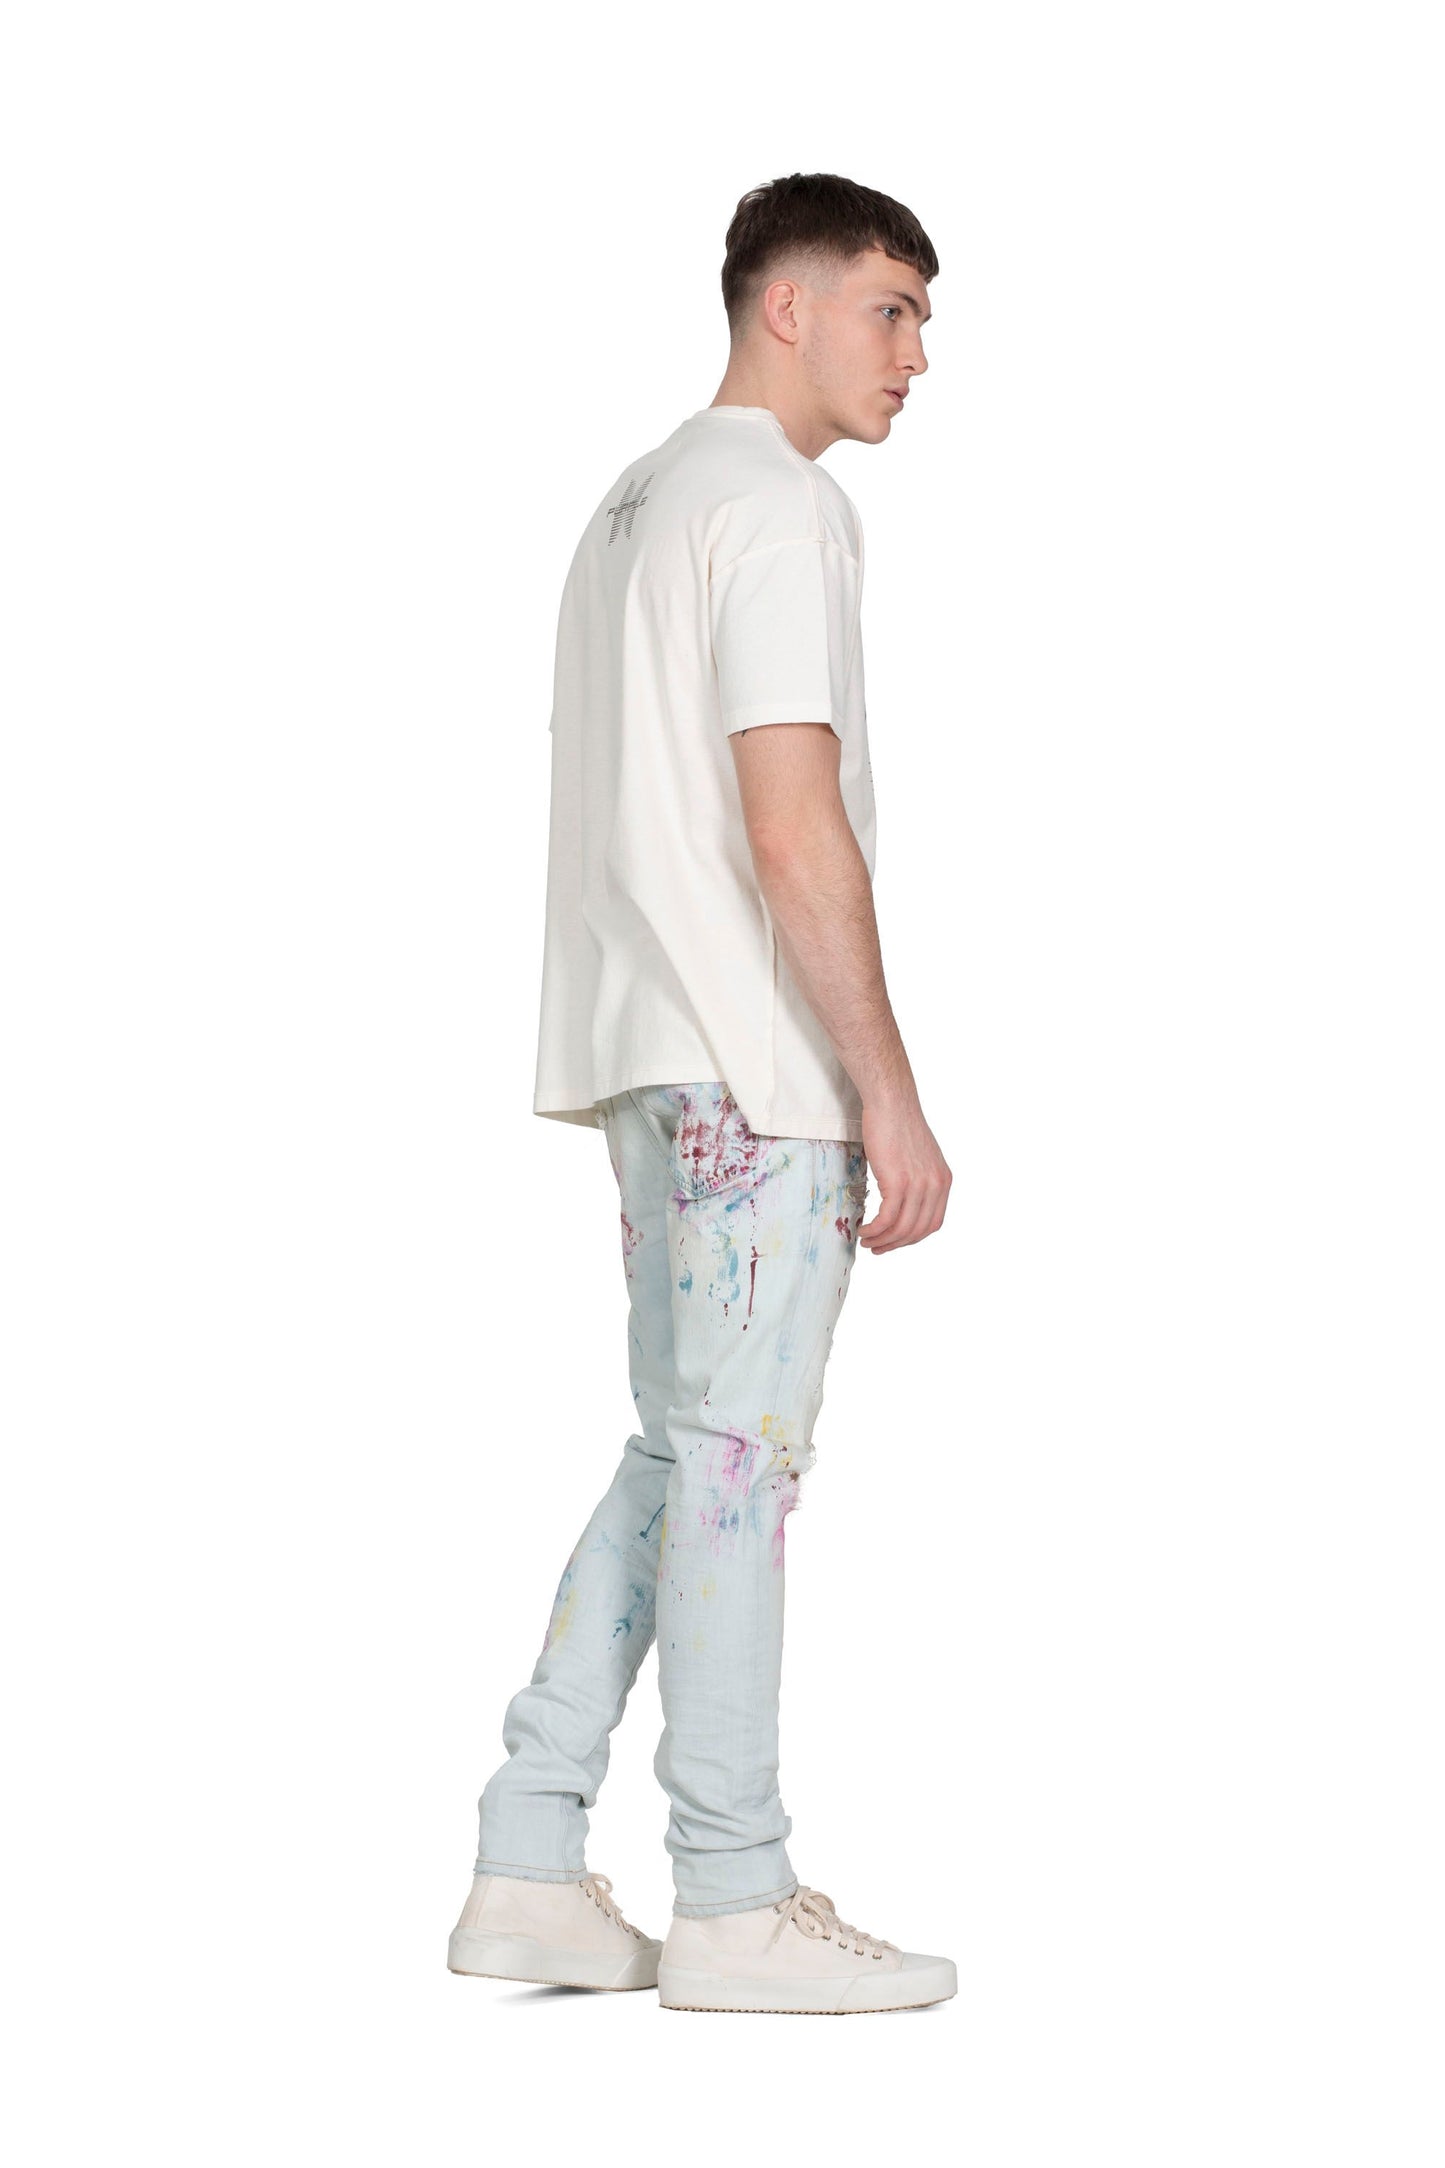 PURPLE BRAND - Men's Denim Jean - Low Rise Skinny - Style No. P001 - Faded Blowout Paint - Model Styled Pose